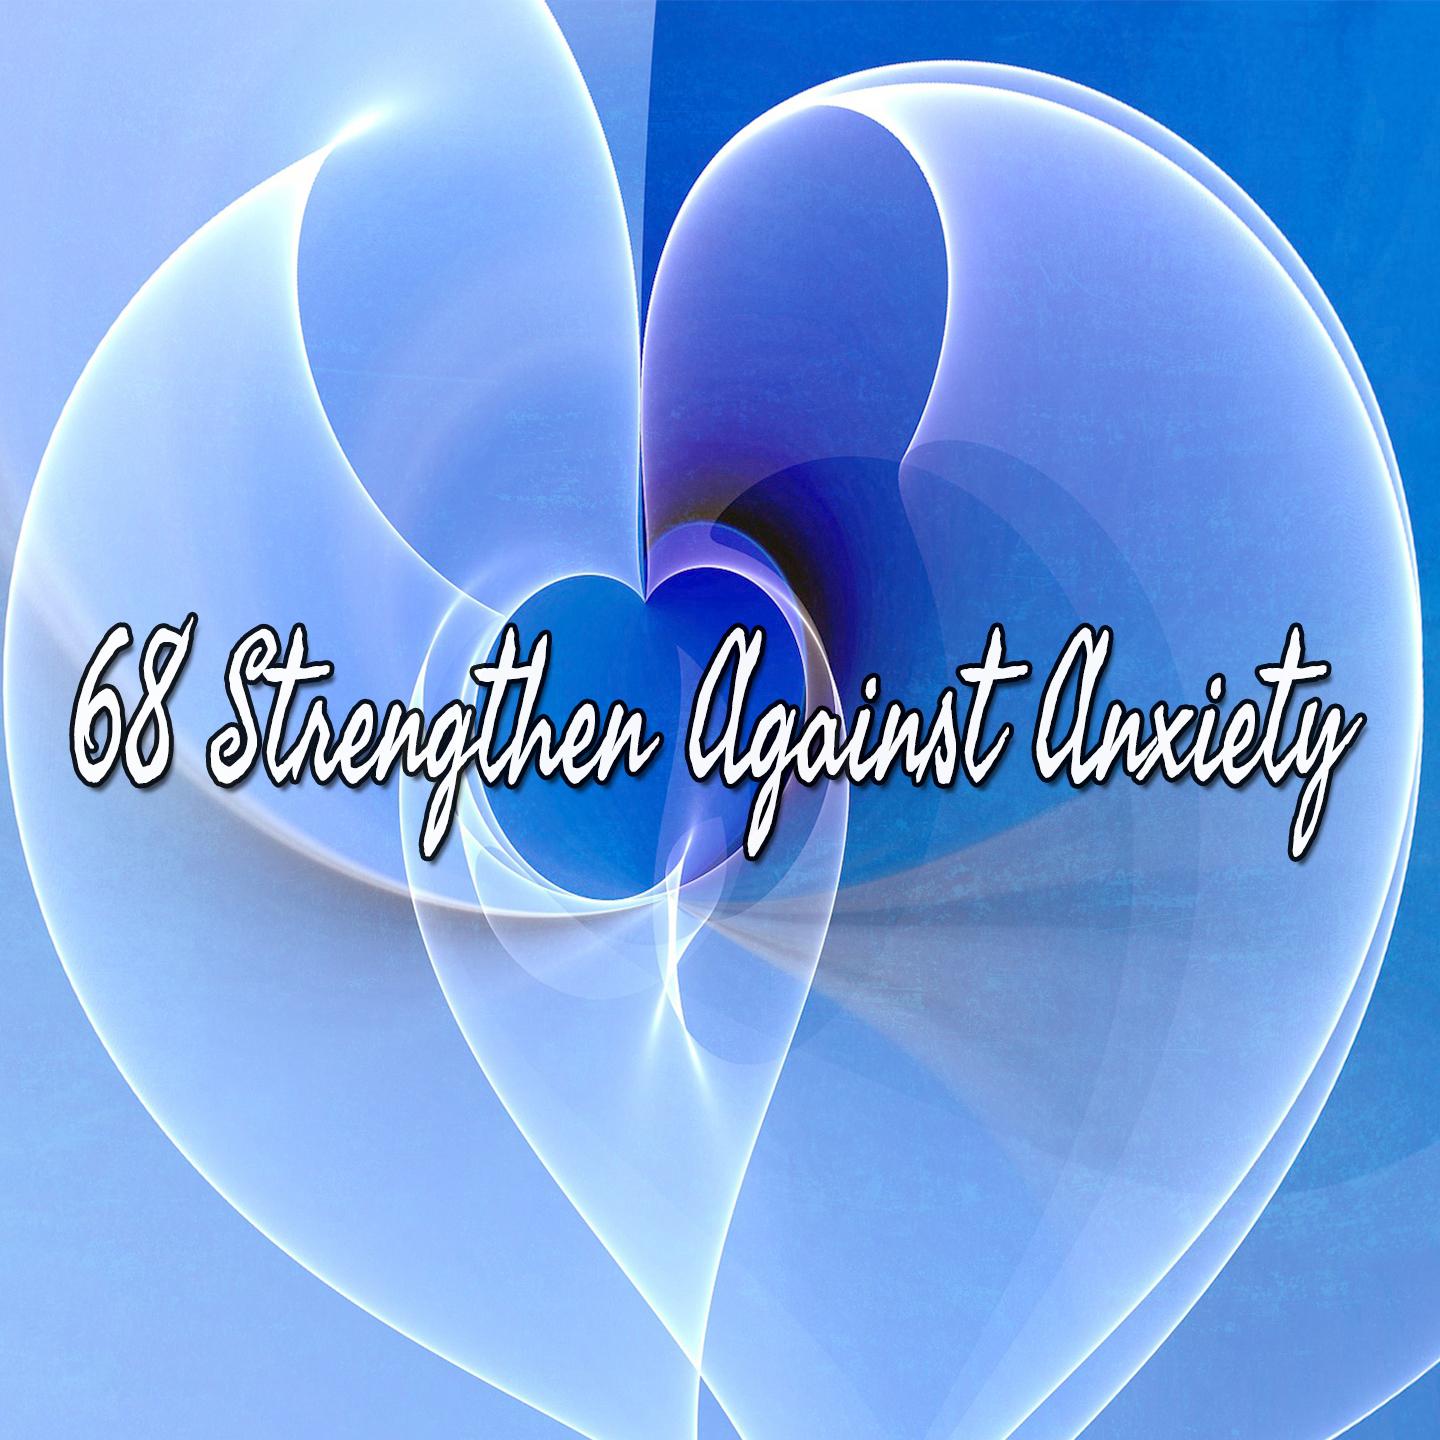 68 Strengthen Against Anxiety